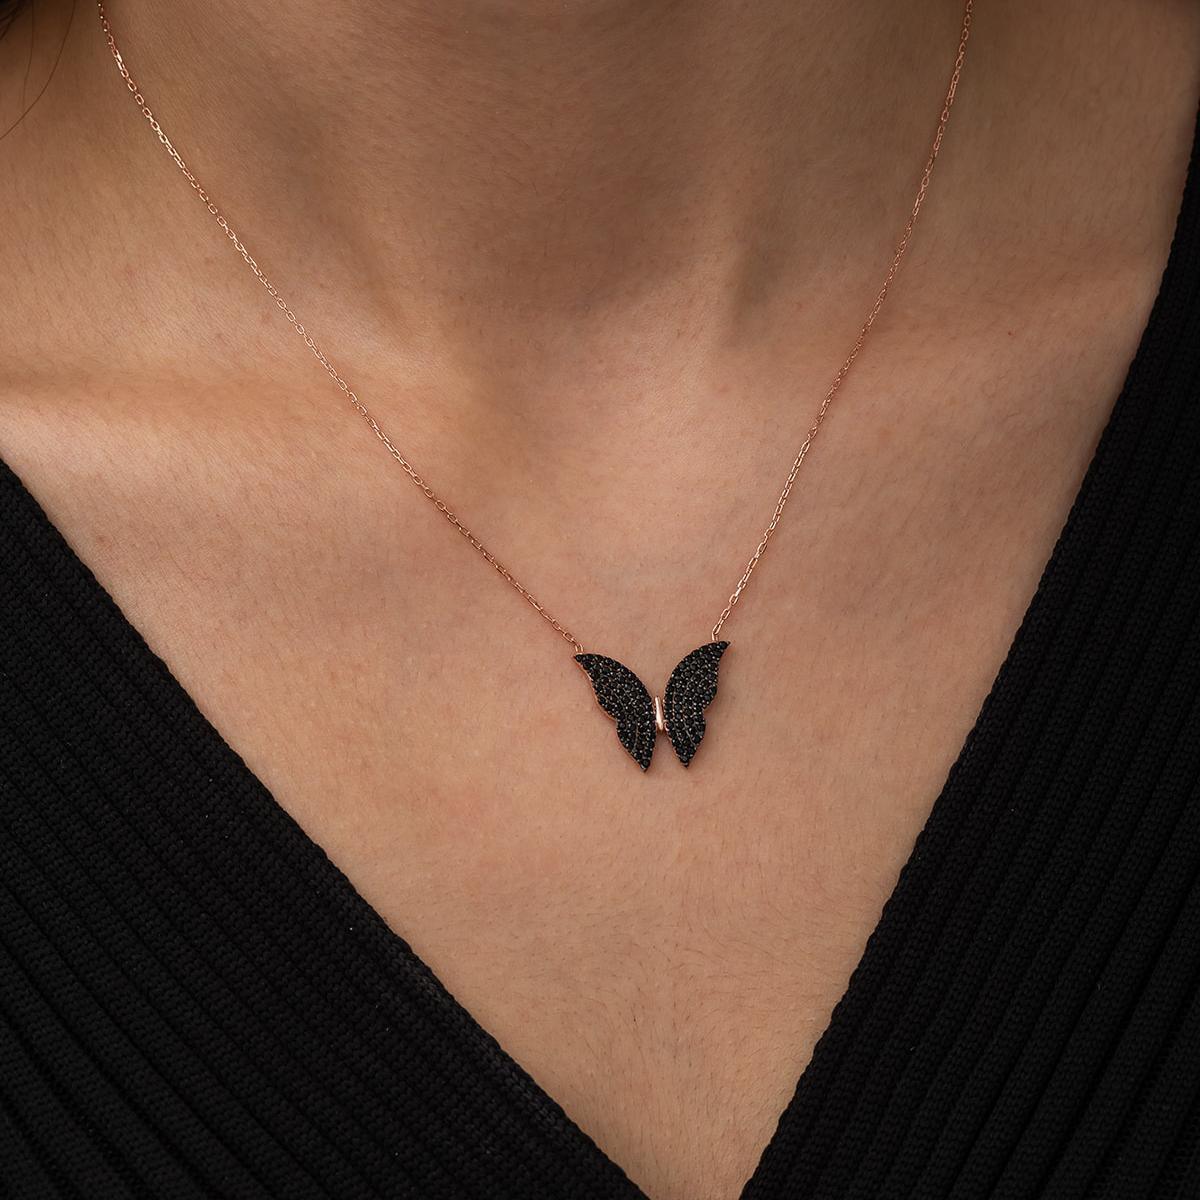 Black Butterfly Zirconia Necklace • Black Butterfly Silver Necklace - Trending Silver Gifts